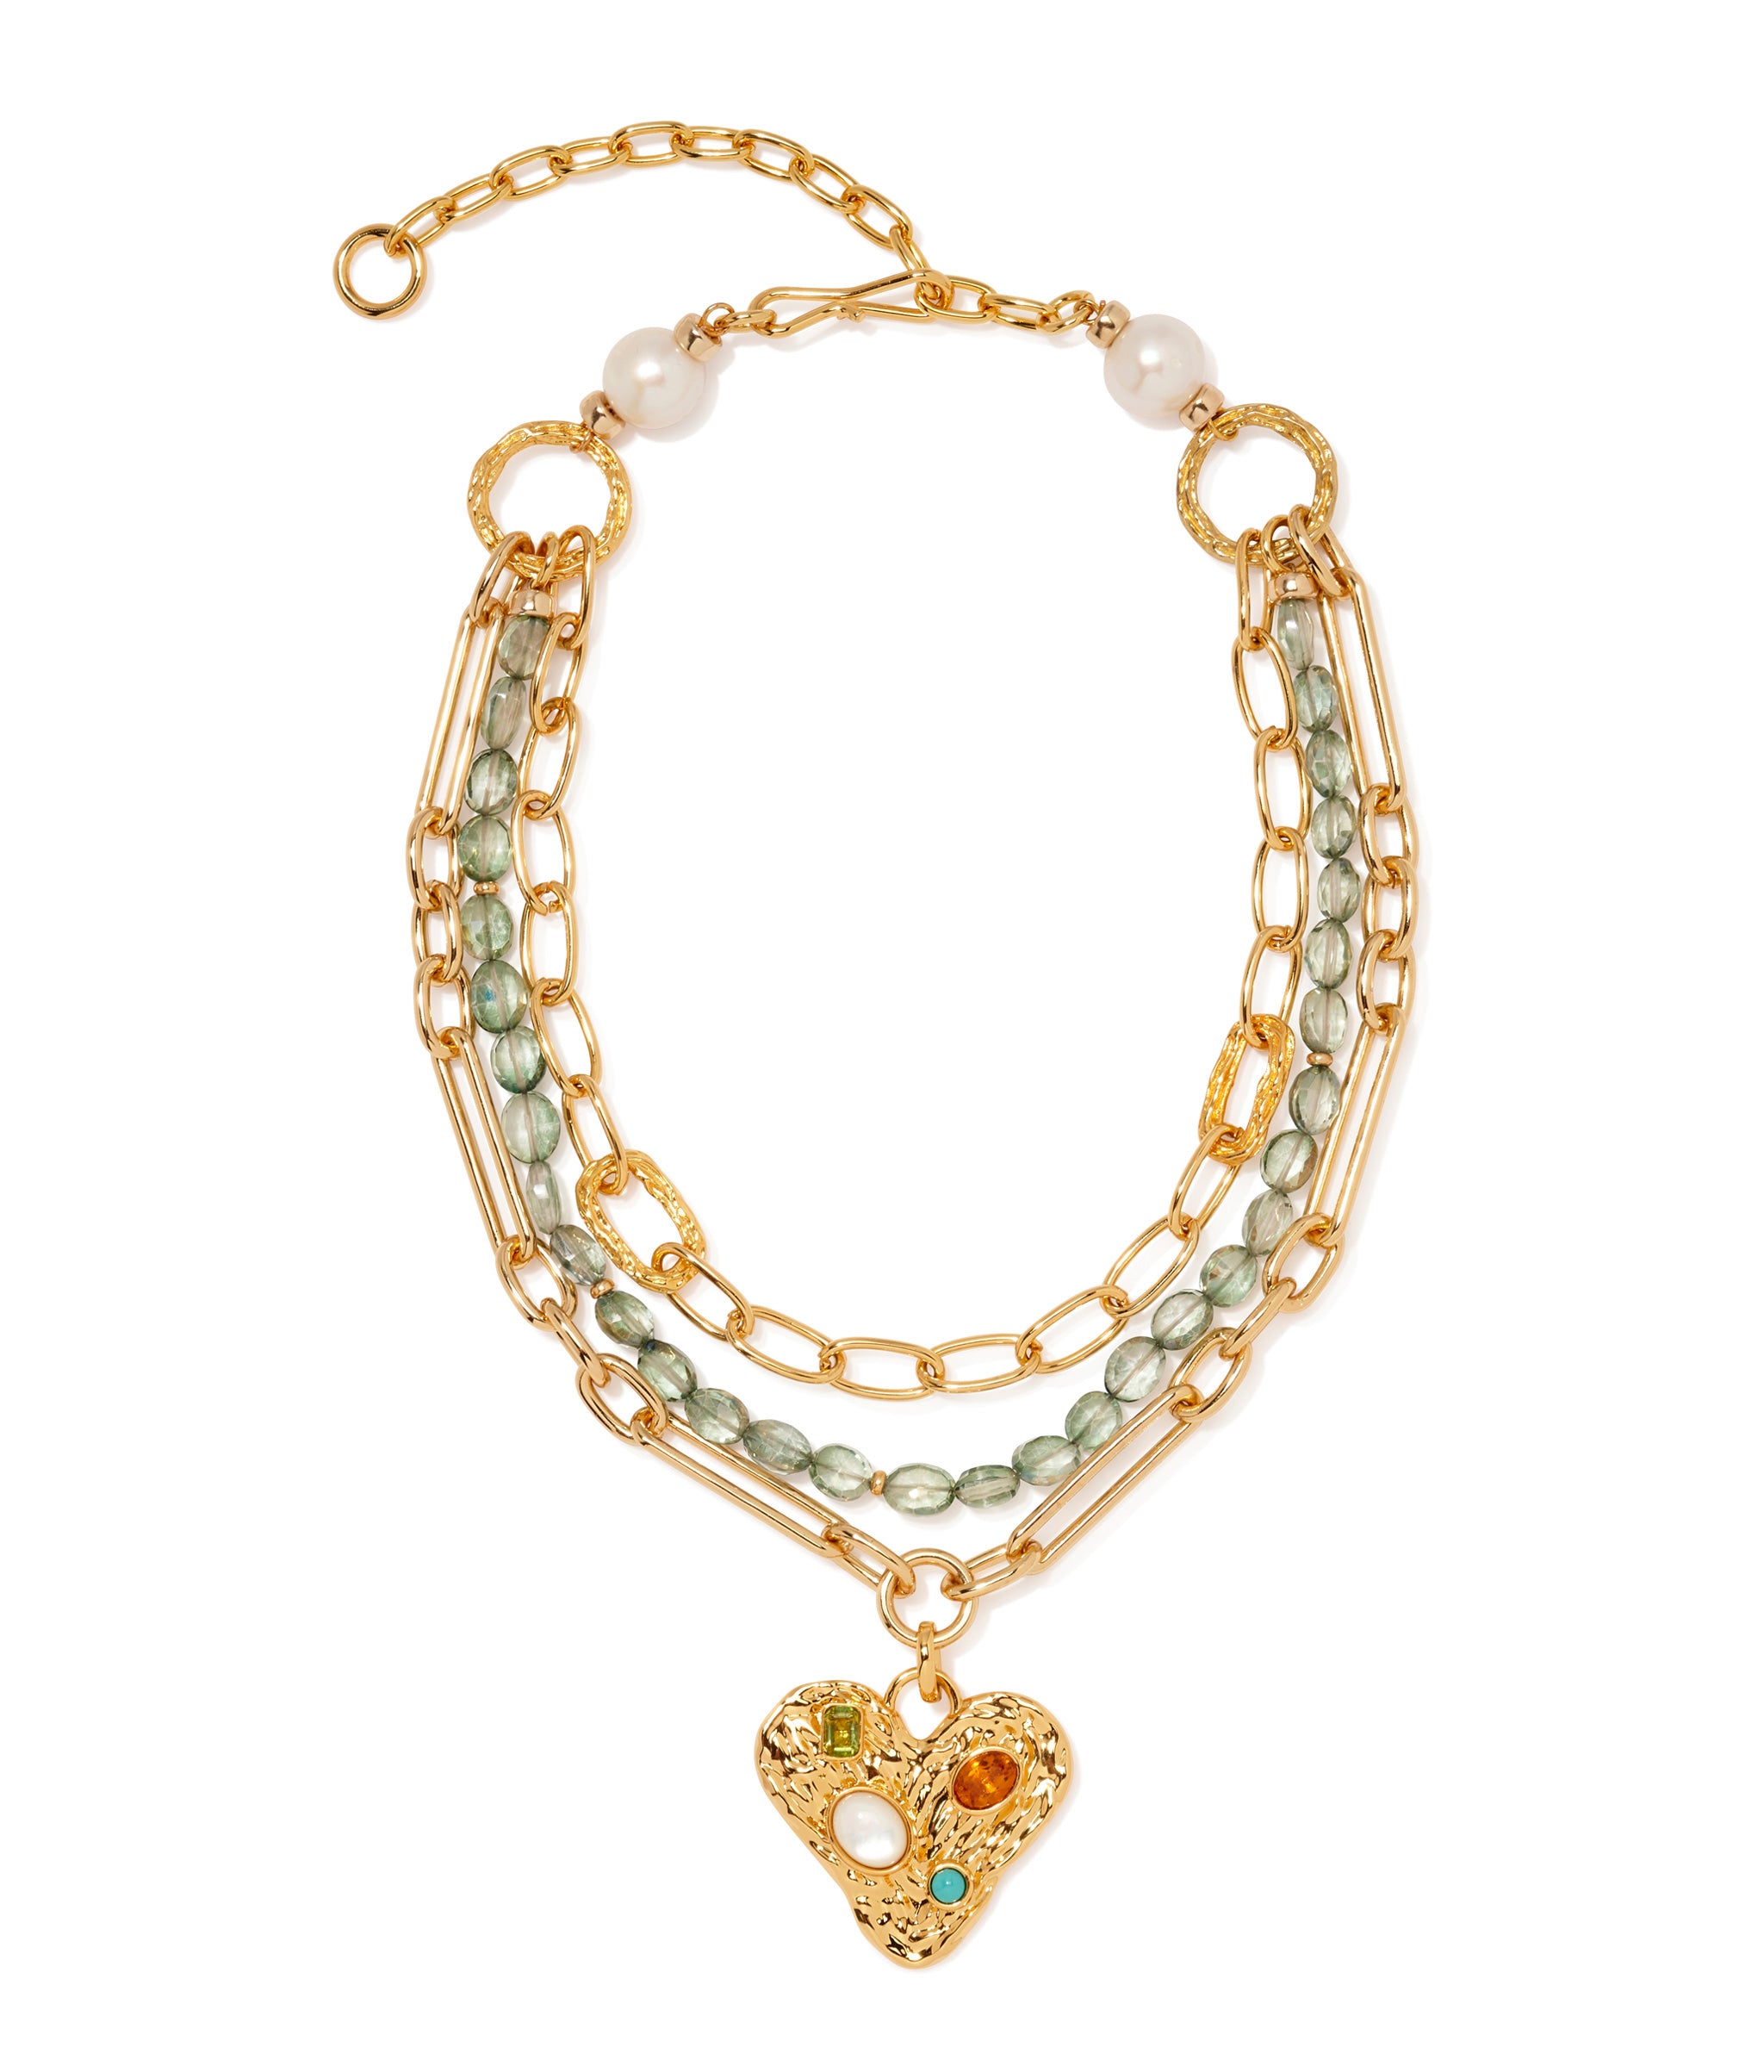 Treasure Trove Necklace. Gold chain, green crystal quartz beads, gold heart pendant inlaid with colorful stones.